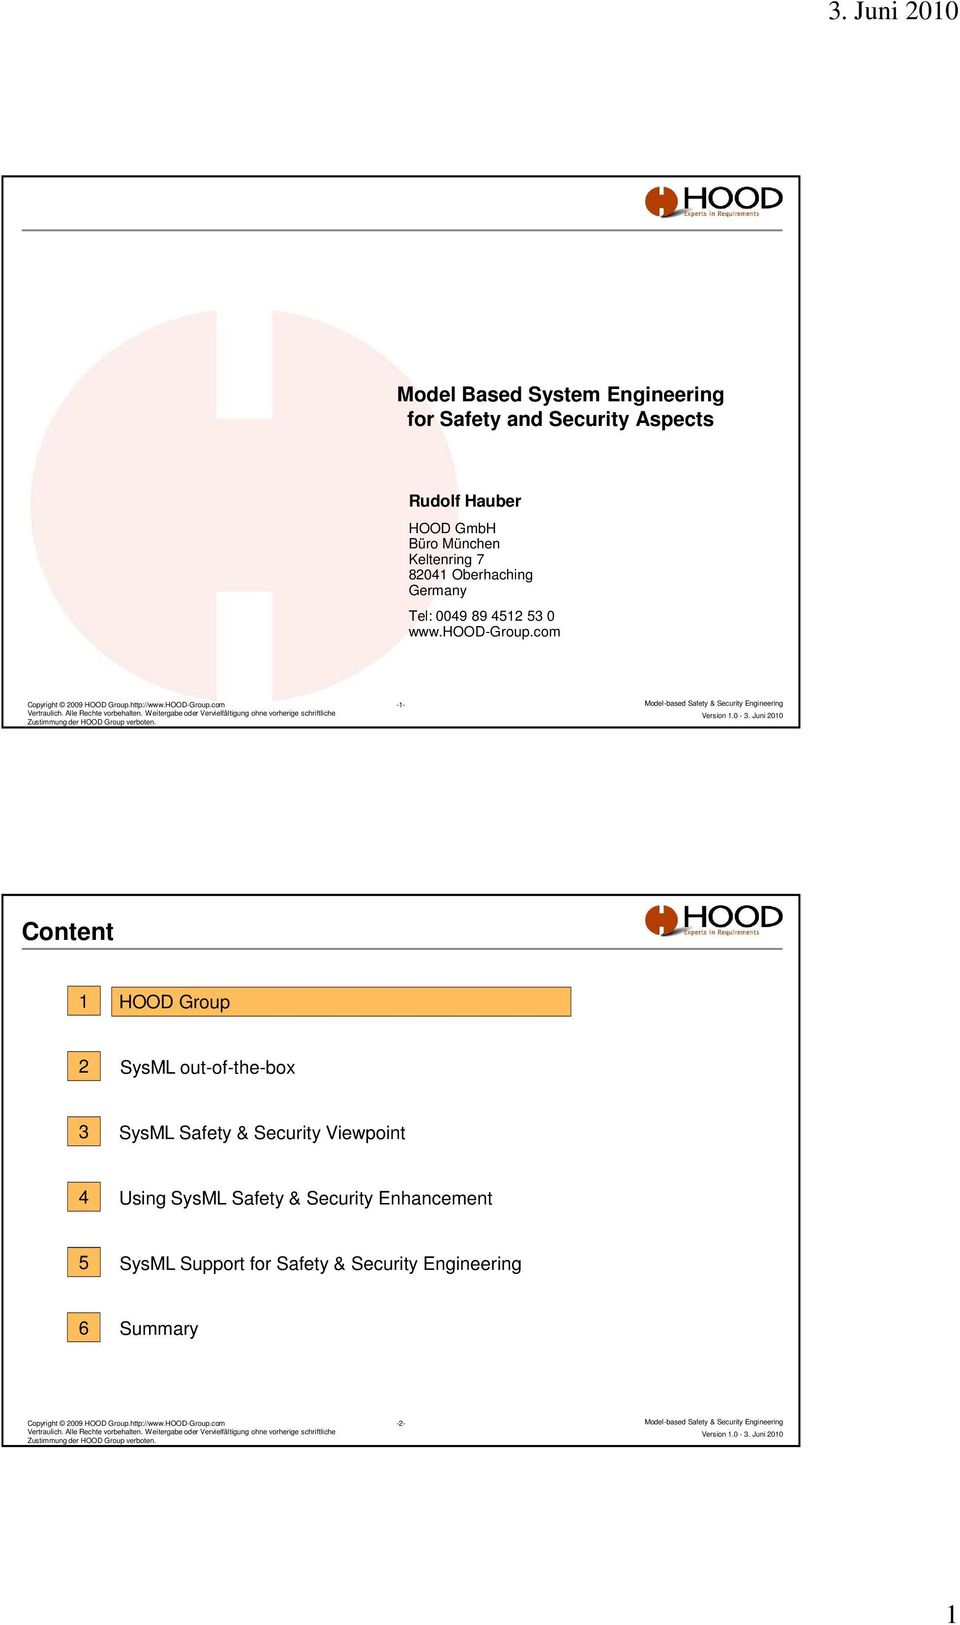 com Content 1 HOOD Group 2 SysML out-of-the-box 3 SysML Safety & Security Viewpoint 4 Using